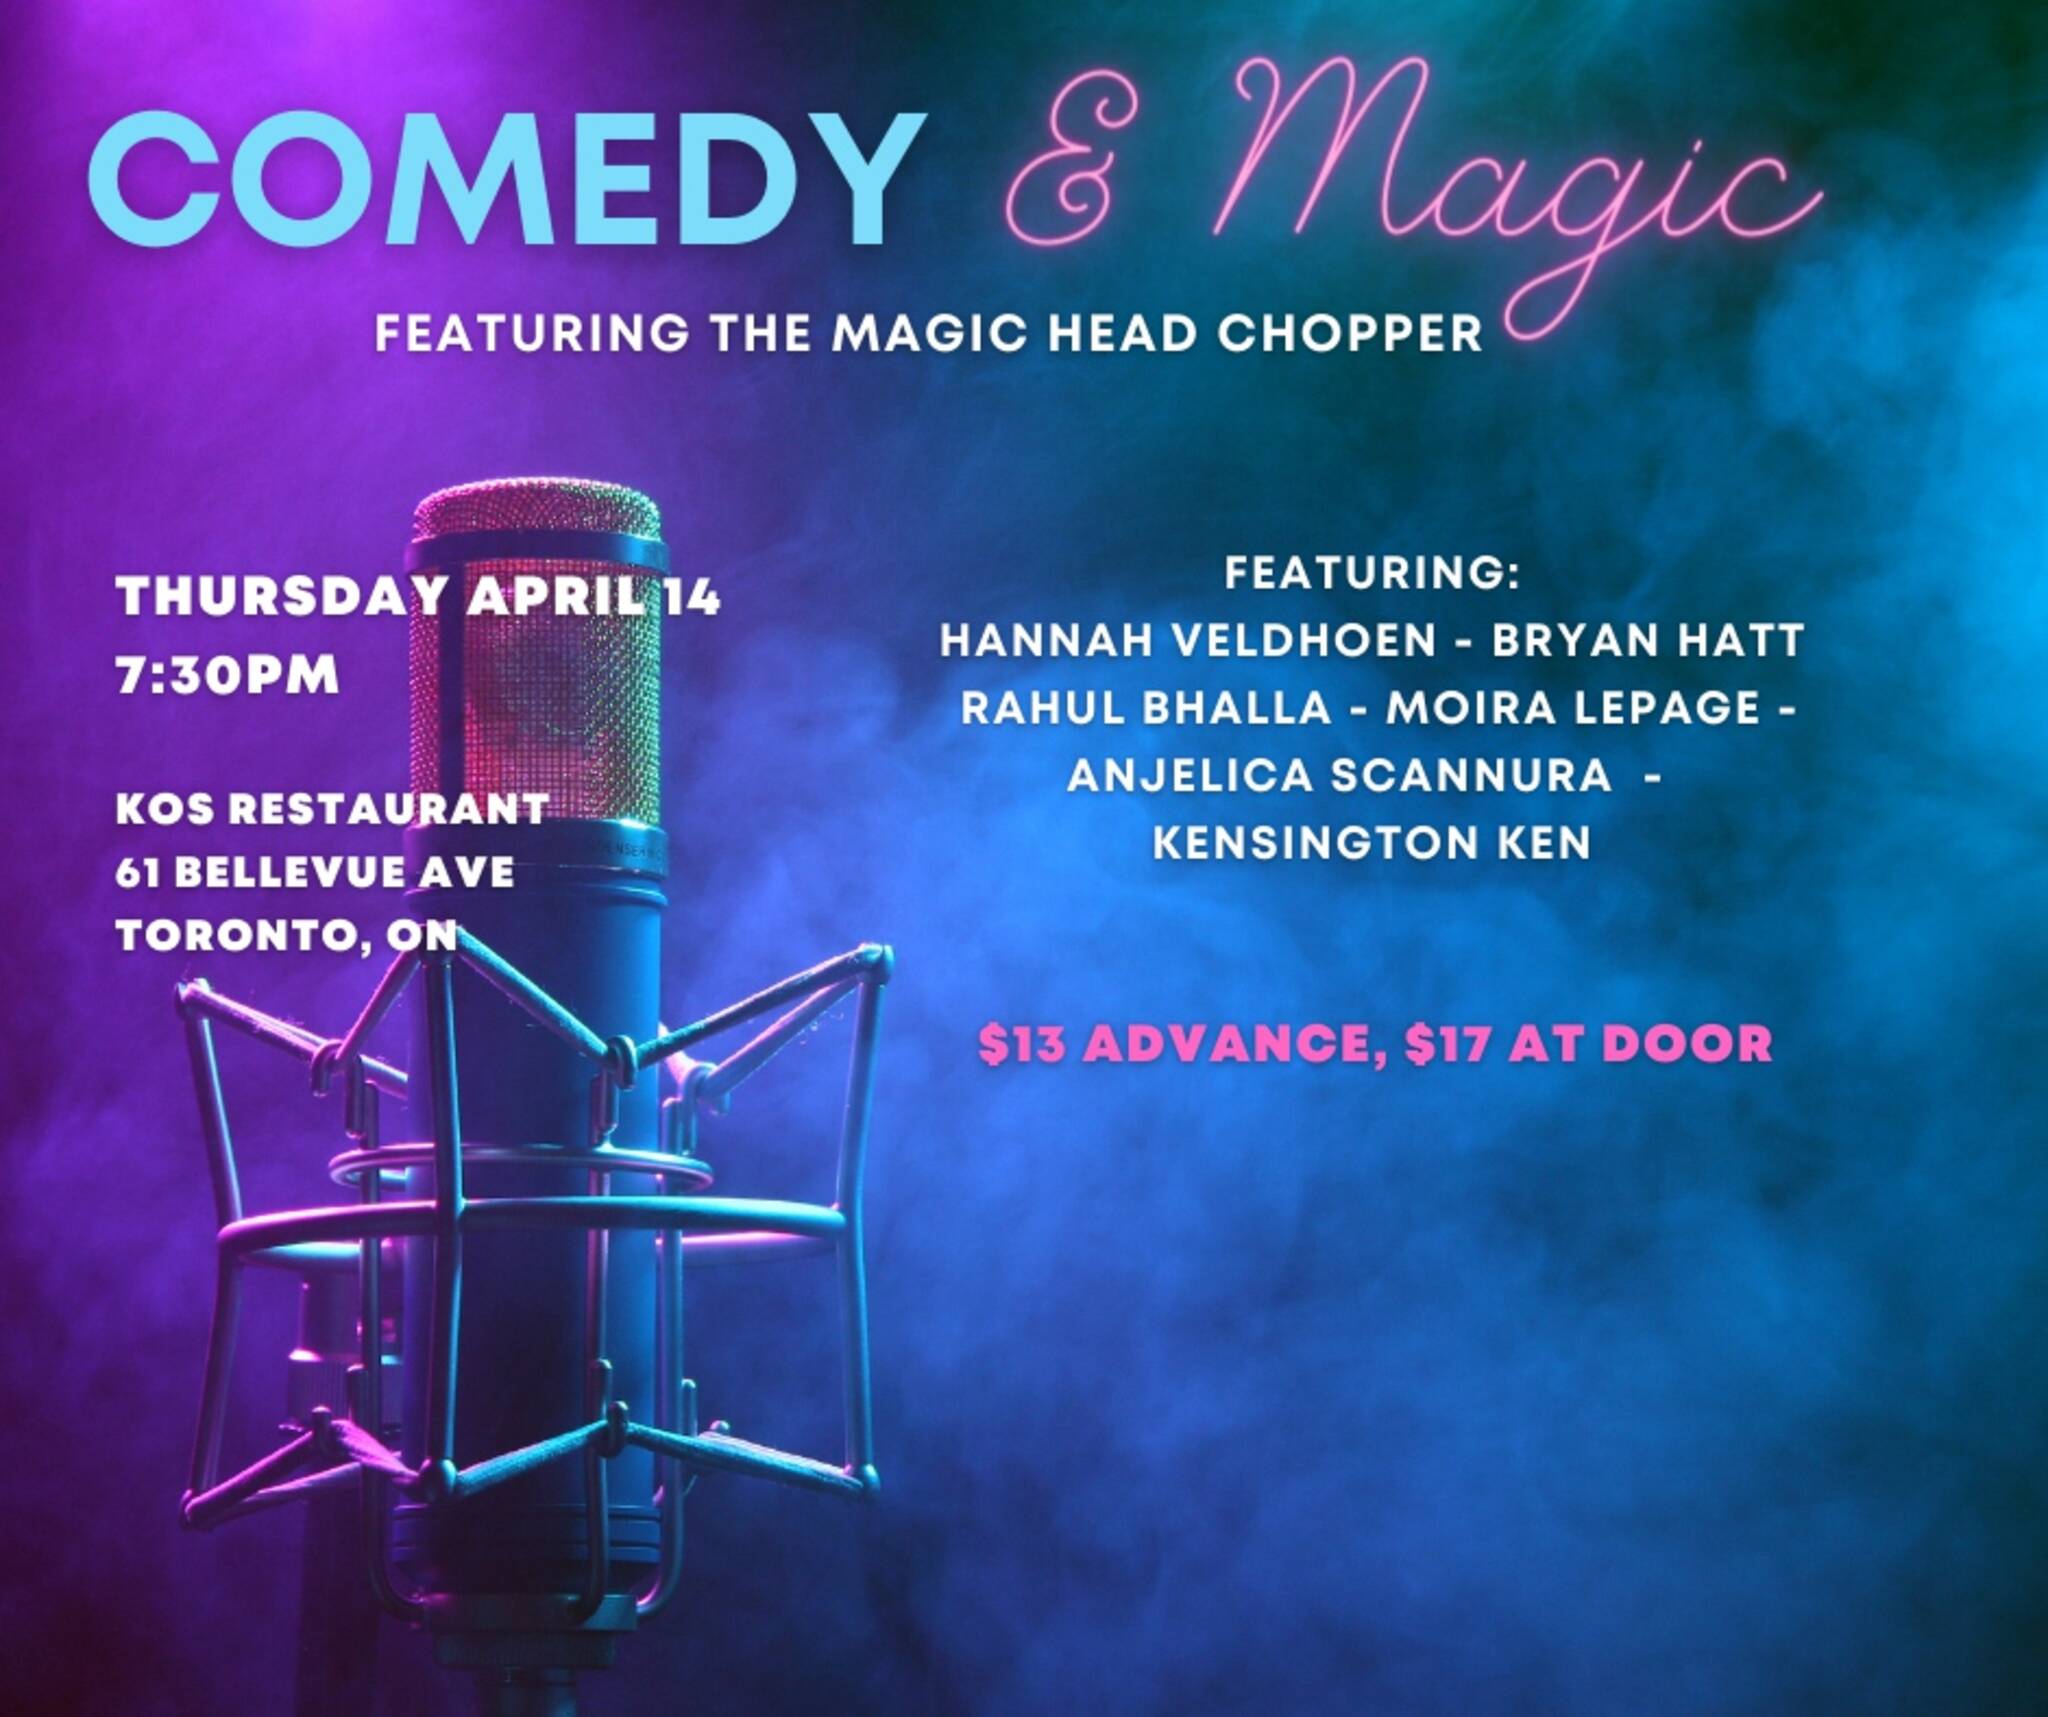 Thursday night comedy and magic